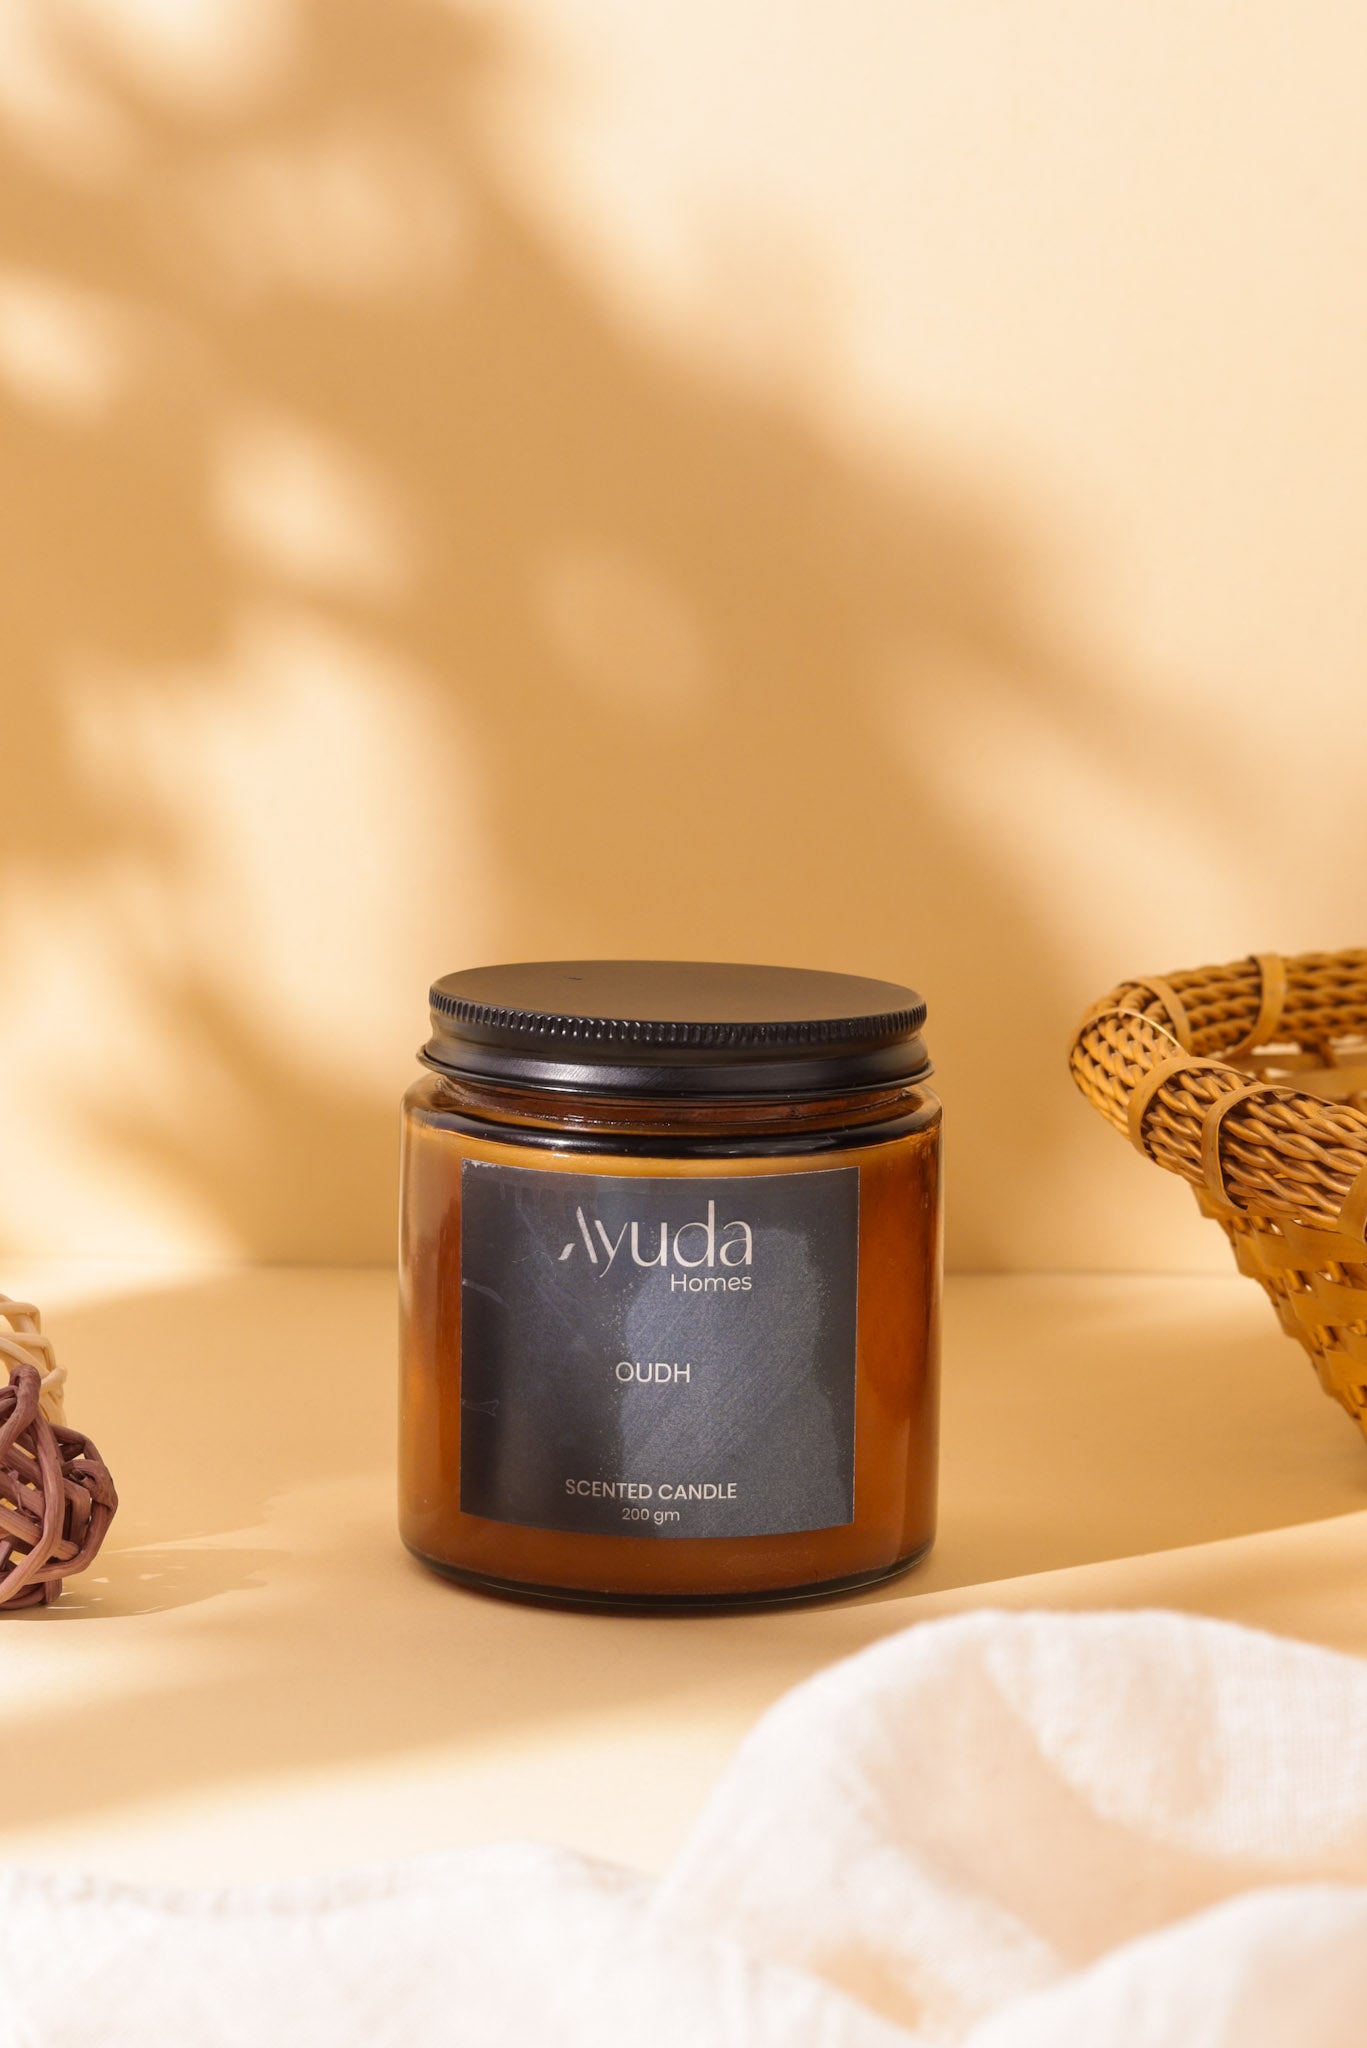 Oudh Scented Candle - Soy Wax | Amber Glass Jar - Ayuda Homes